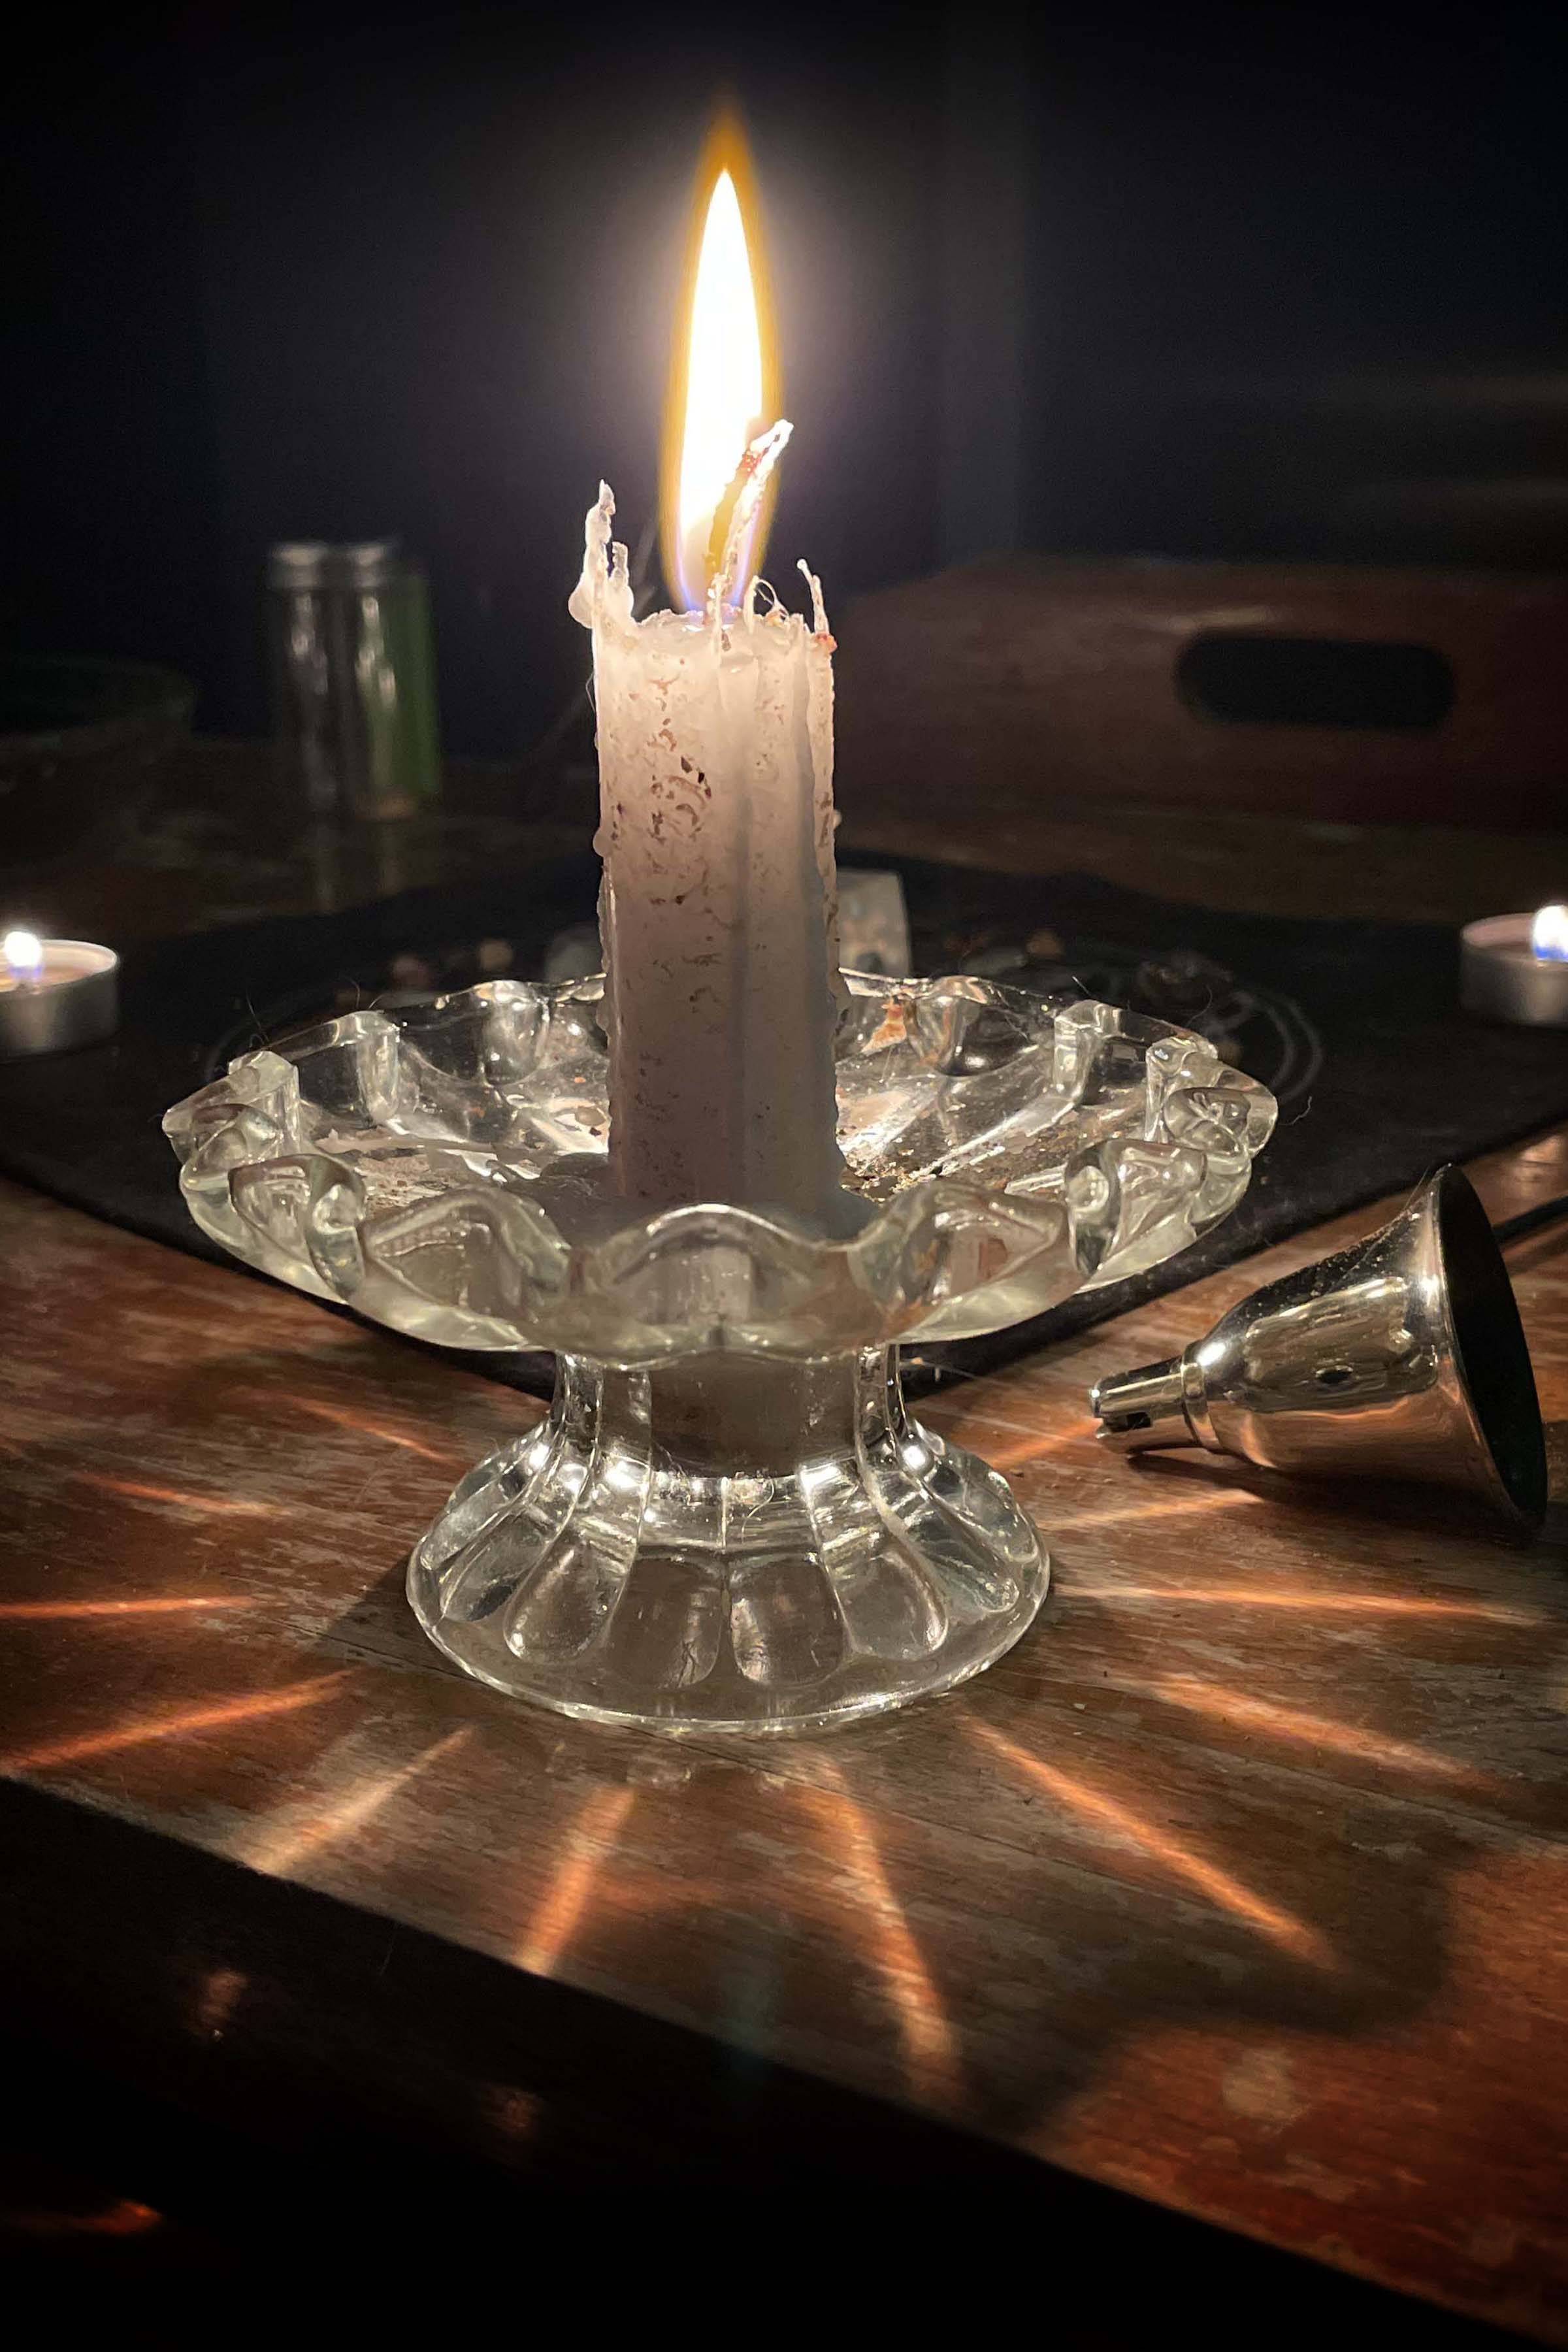 A single white candle glows in a darkened room, hiding the crystal grid behind it.